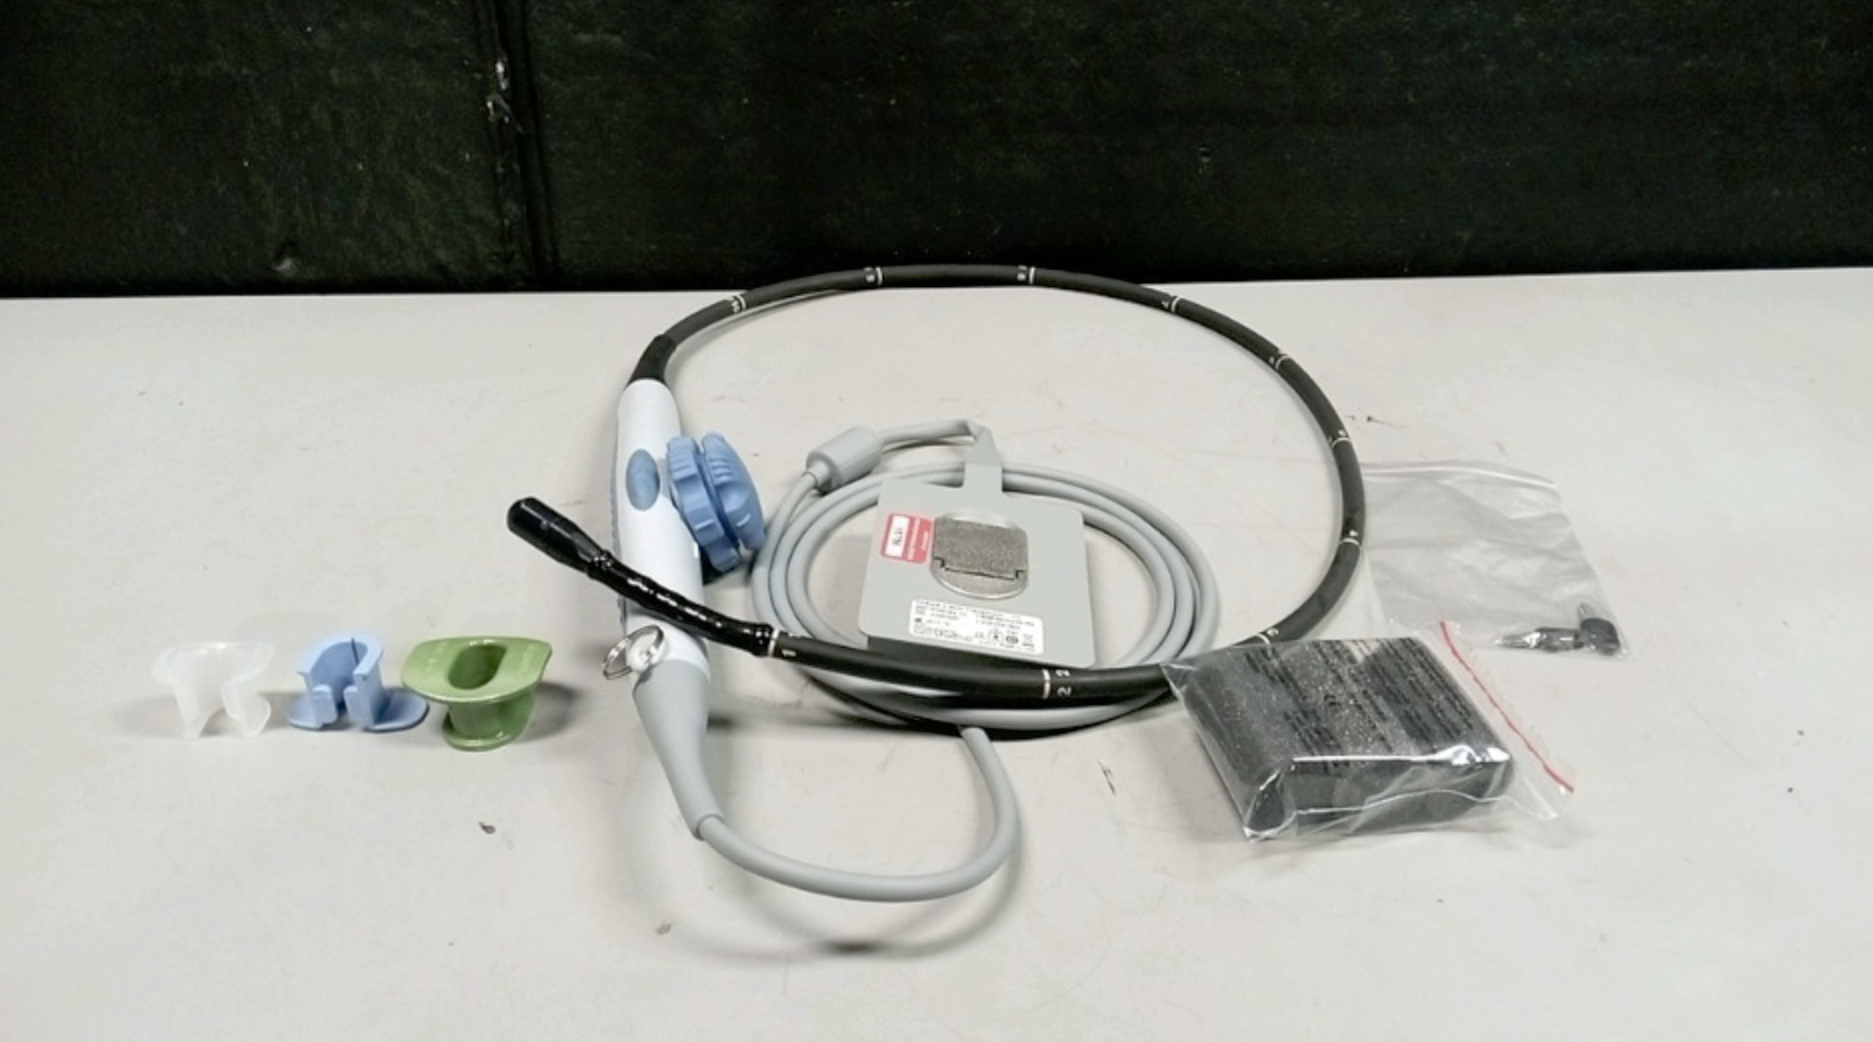 Sonosite TEEx 8-3MHz Ultrasound Probe Transducer USA Made 2013 For M-Turbo, Edge DIAGNOSTIC ULTRASOUND MACHINES FOR SALE